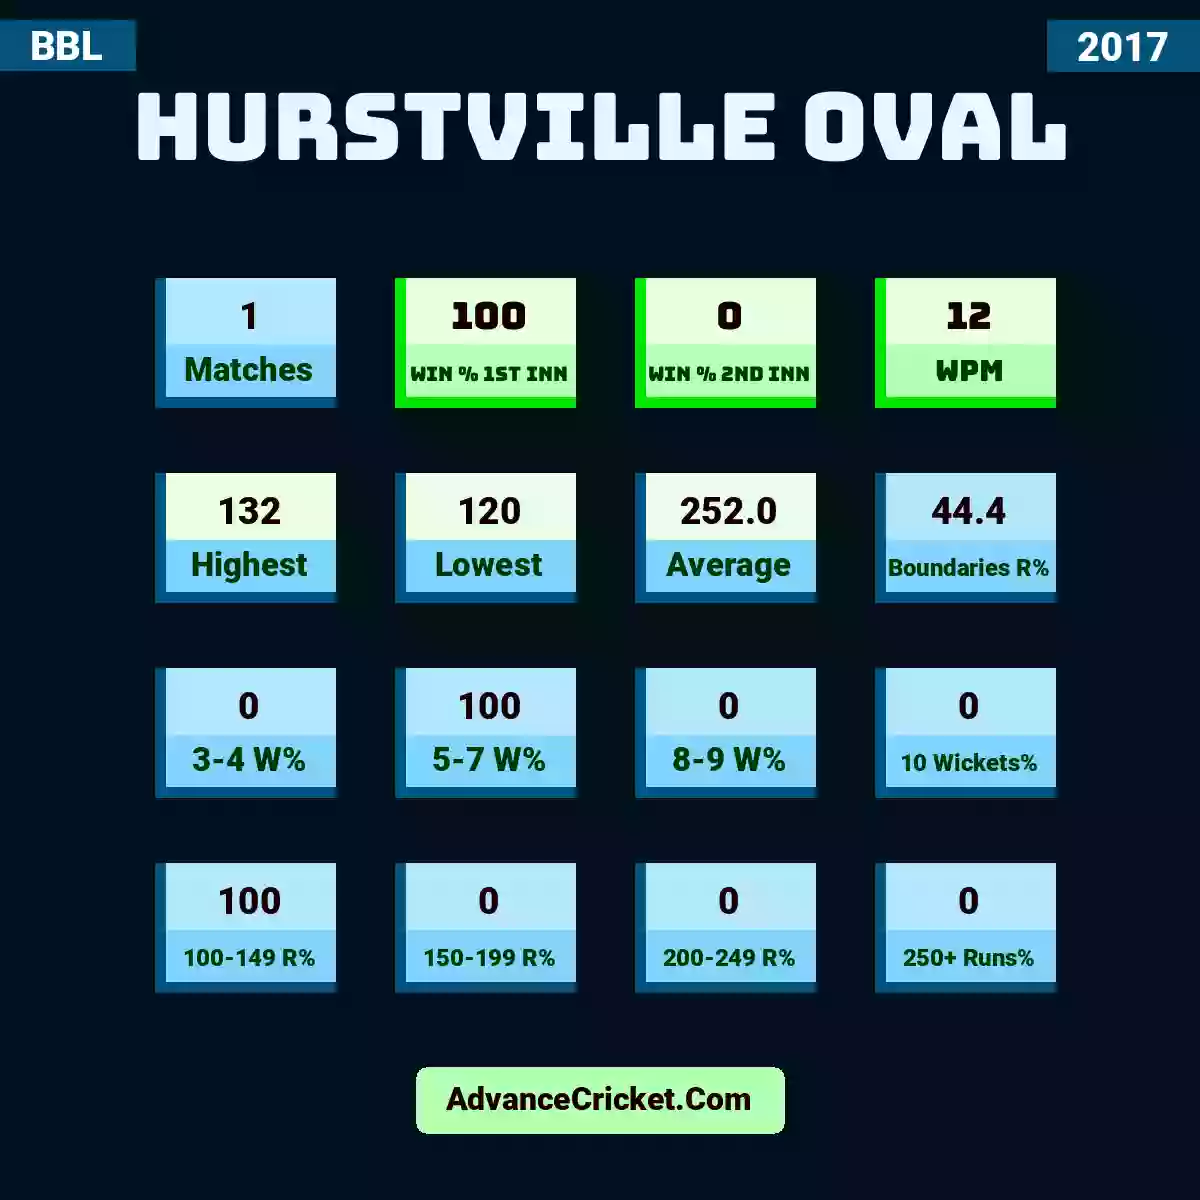 Image showing Hurstville Oval with Matches: 1, Win % 1st Inn: 100, Win % 2nd Inn: 0, WPM: 12, Highest: 132, Lowest: 120, Average: 252.0, Boundaries R%: 44.4, 3-4 W%: 0, 5-7 W%: 100, 8-9 W%: 0, 10 Wickets%: 0, 100-149 R%: 100, 150-199 R%: 0, 200-249 R%: 0, 250+ Runs%: 0.